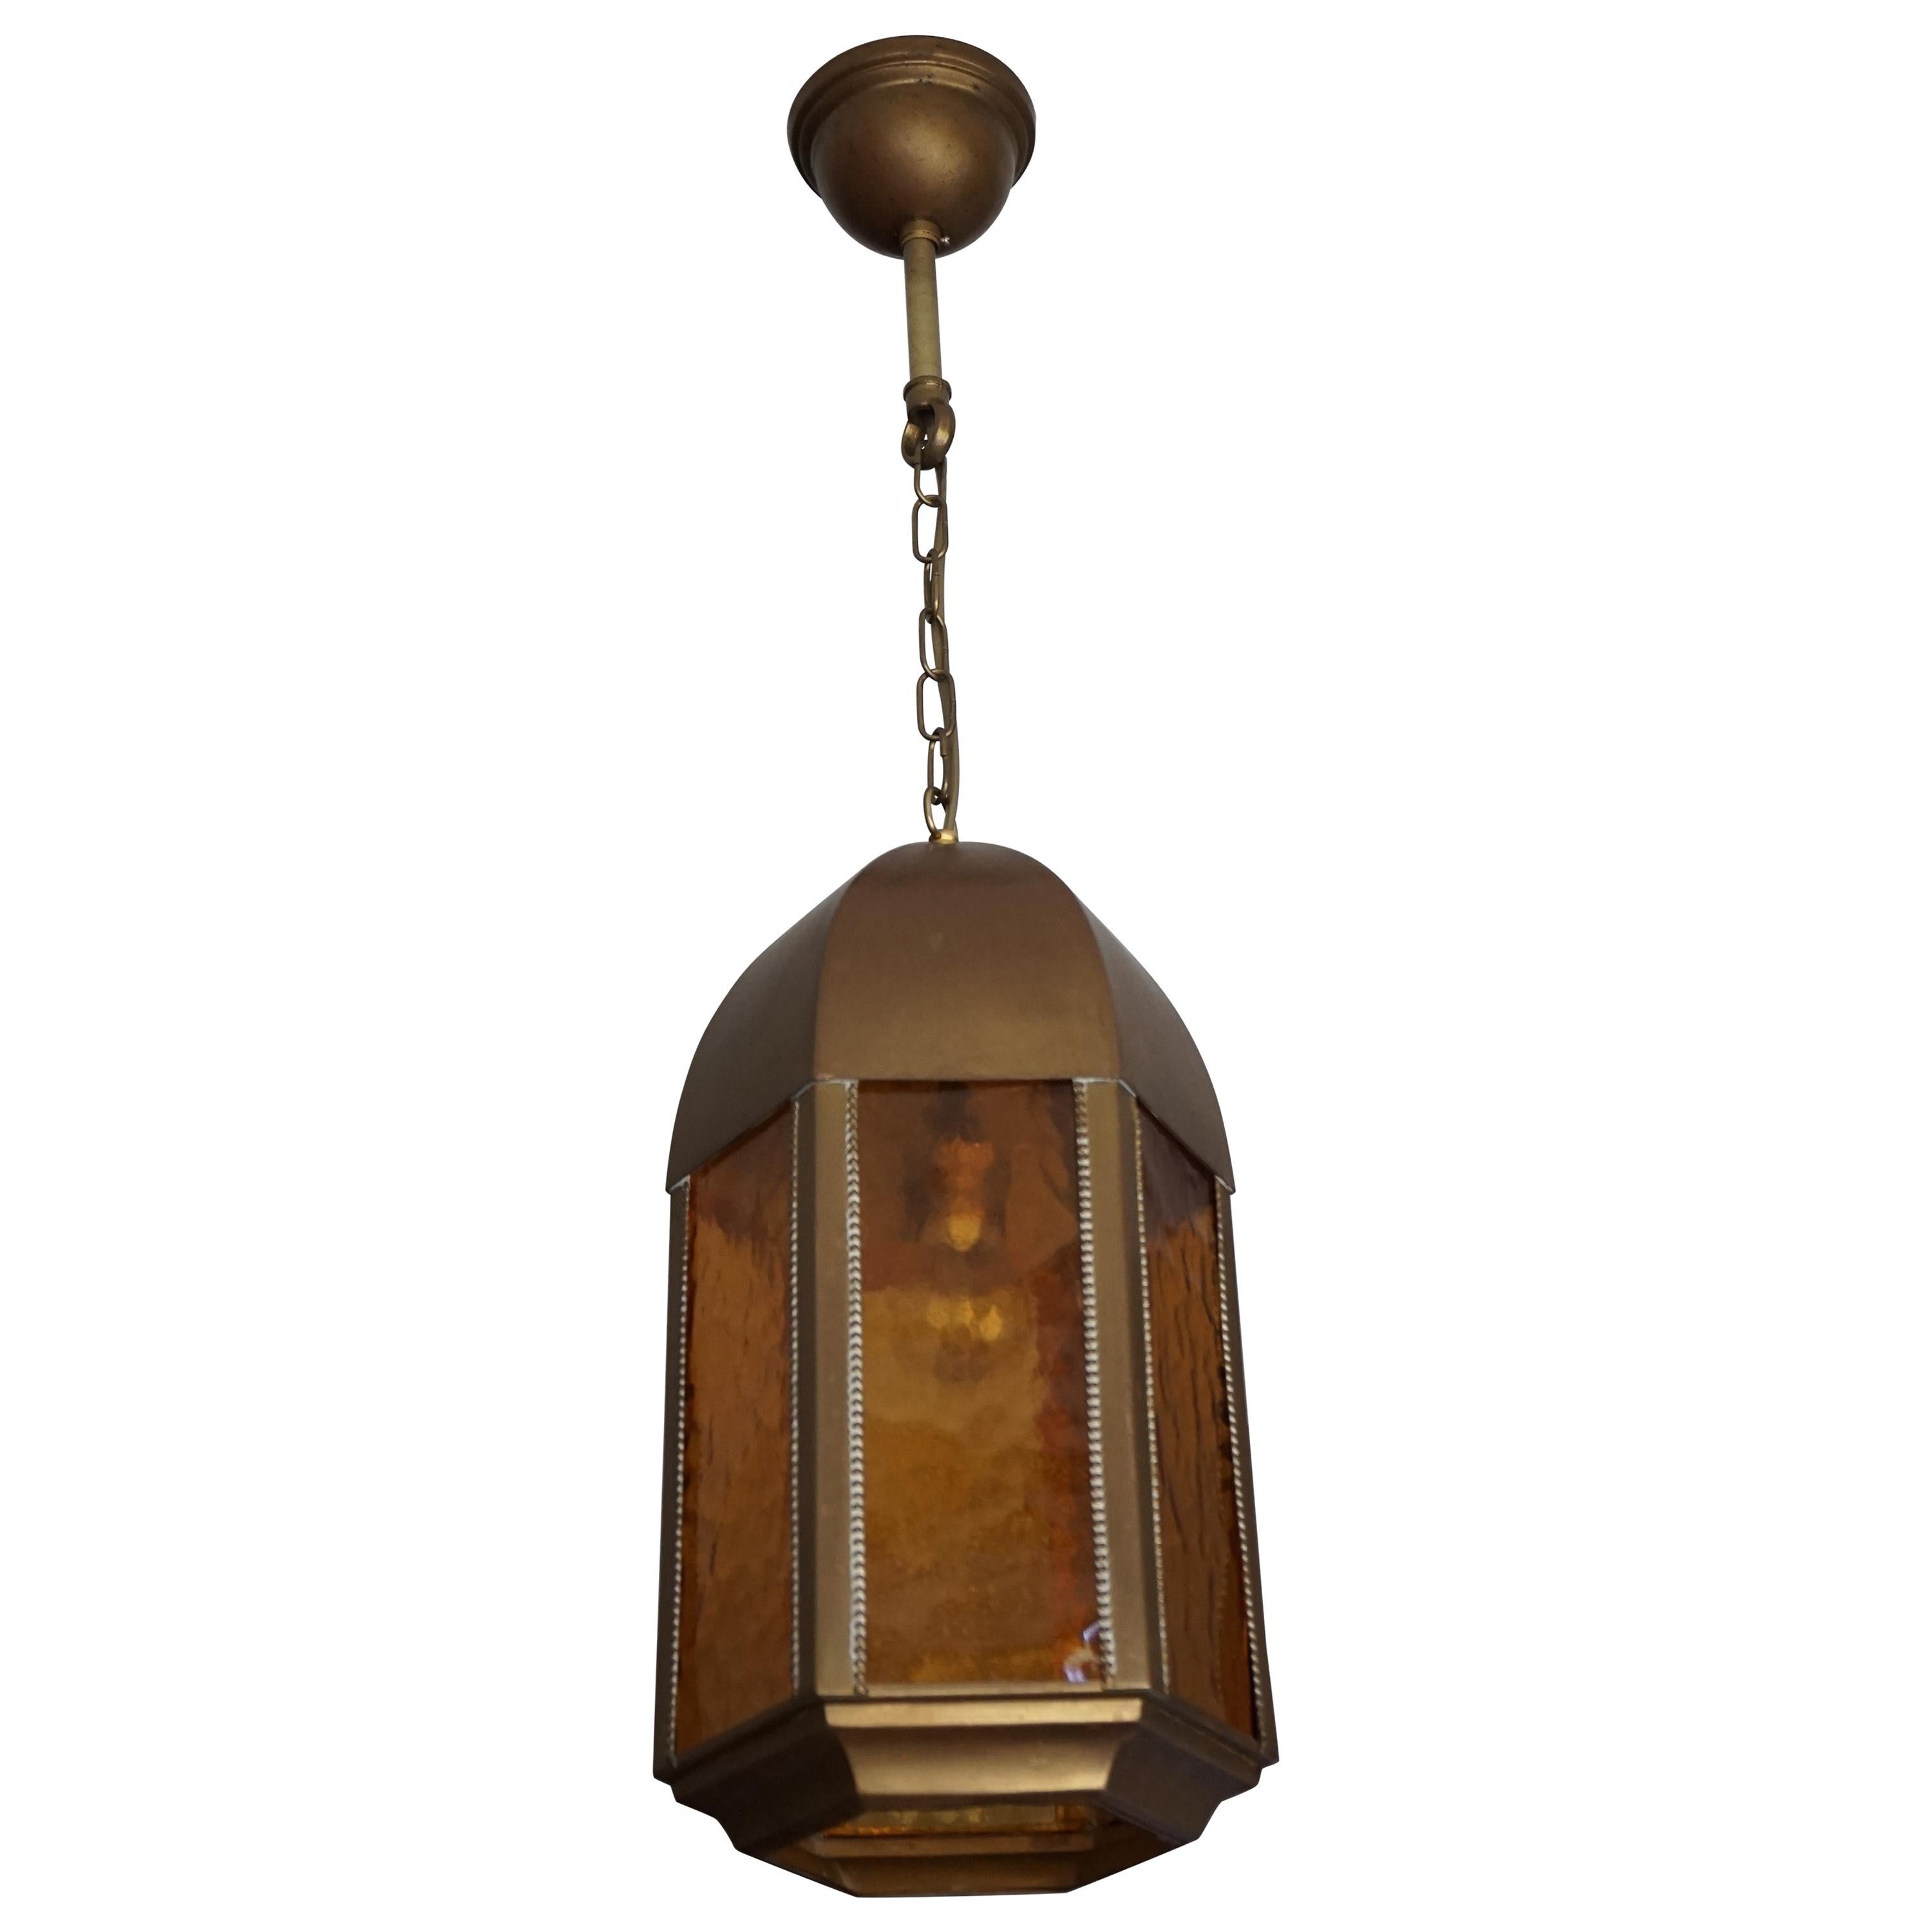 Beautiful Shape and Excellent Condition Gothic Revival Pendant Light W. Dome Top